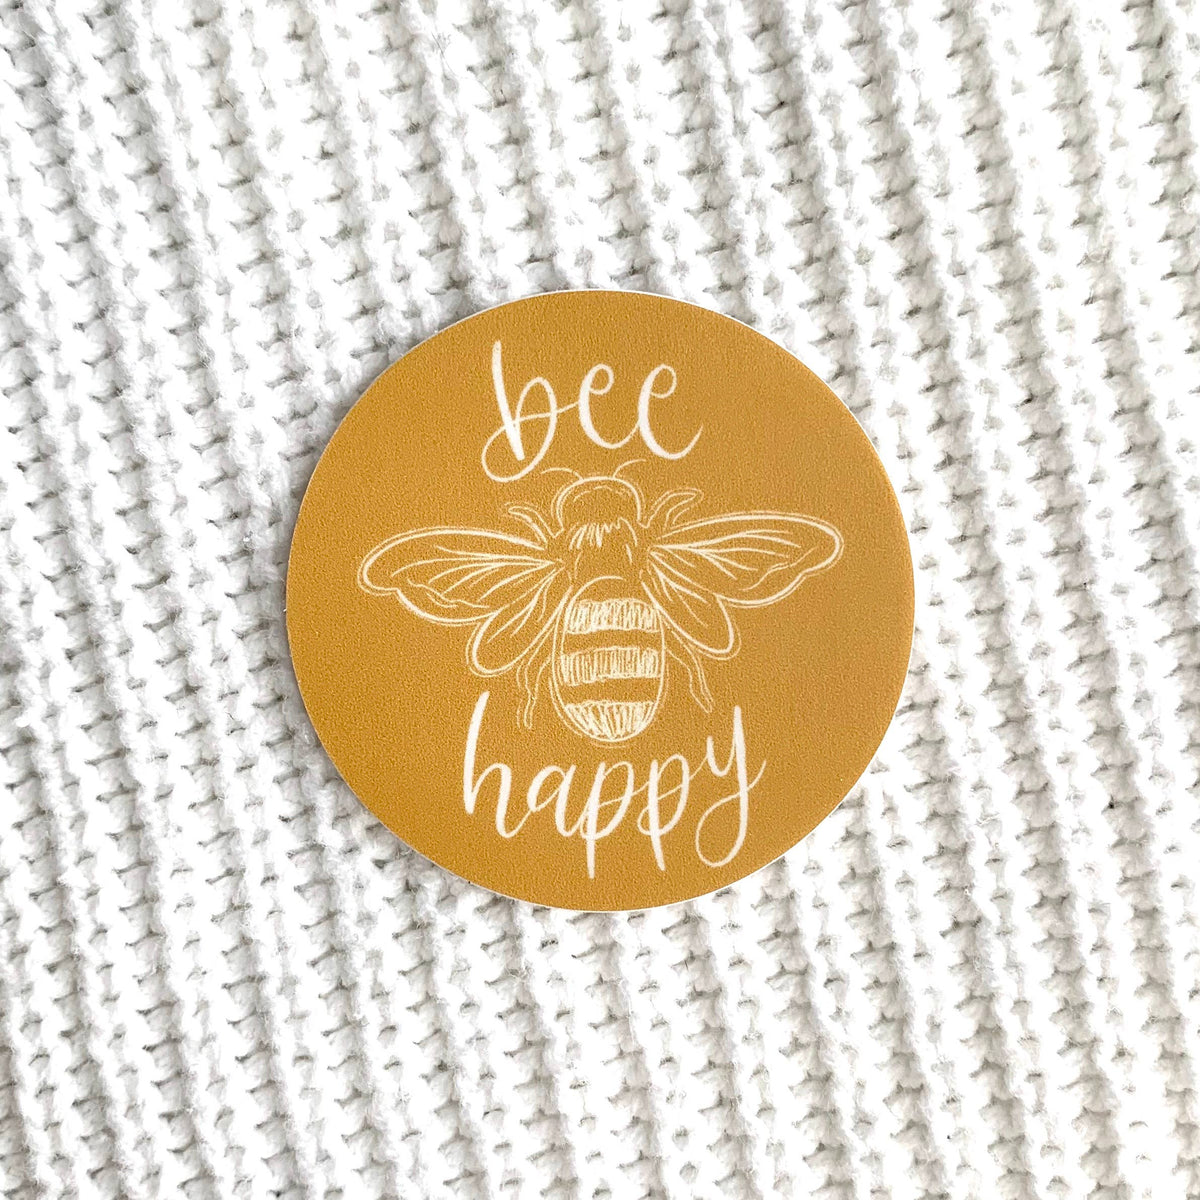 Round mustard yellow sticker with a picture of a bee that says "bee happy"